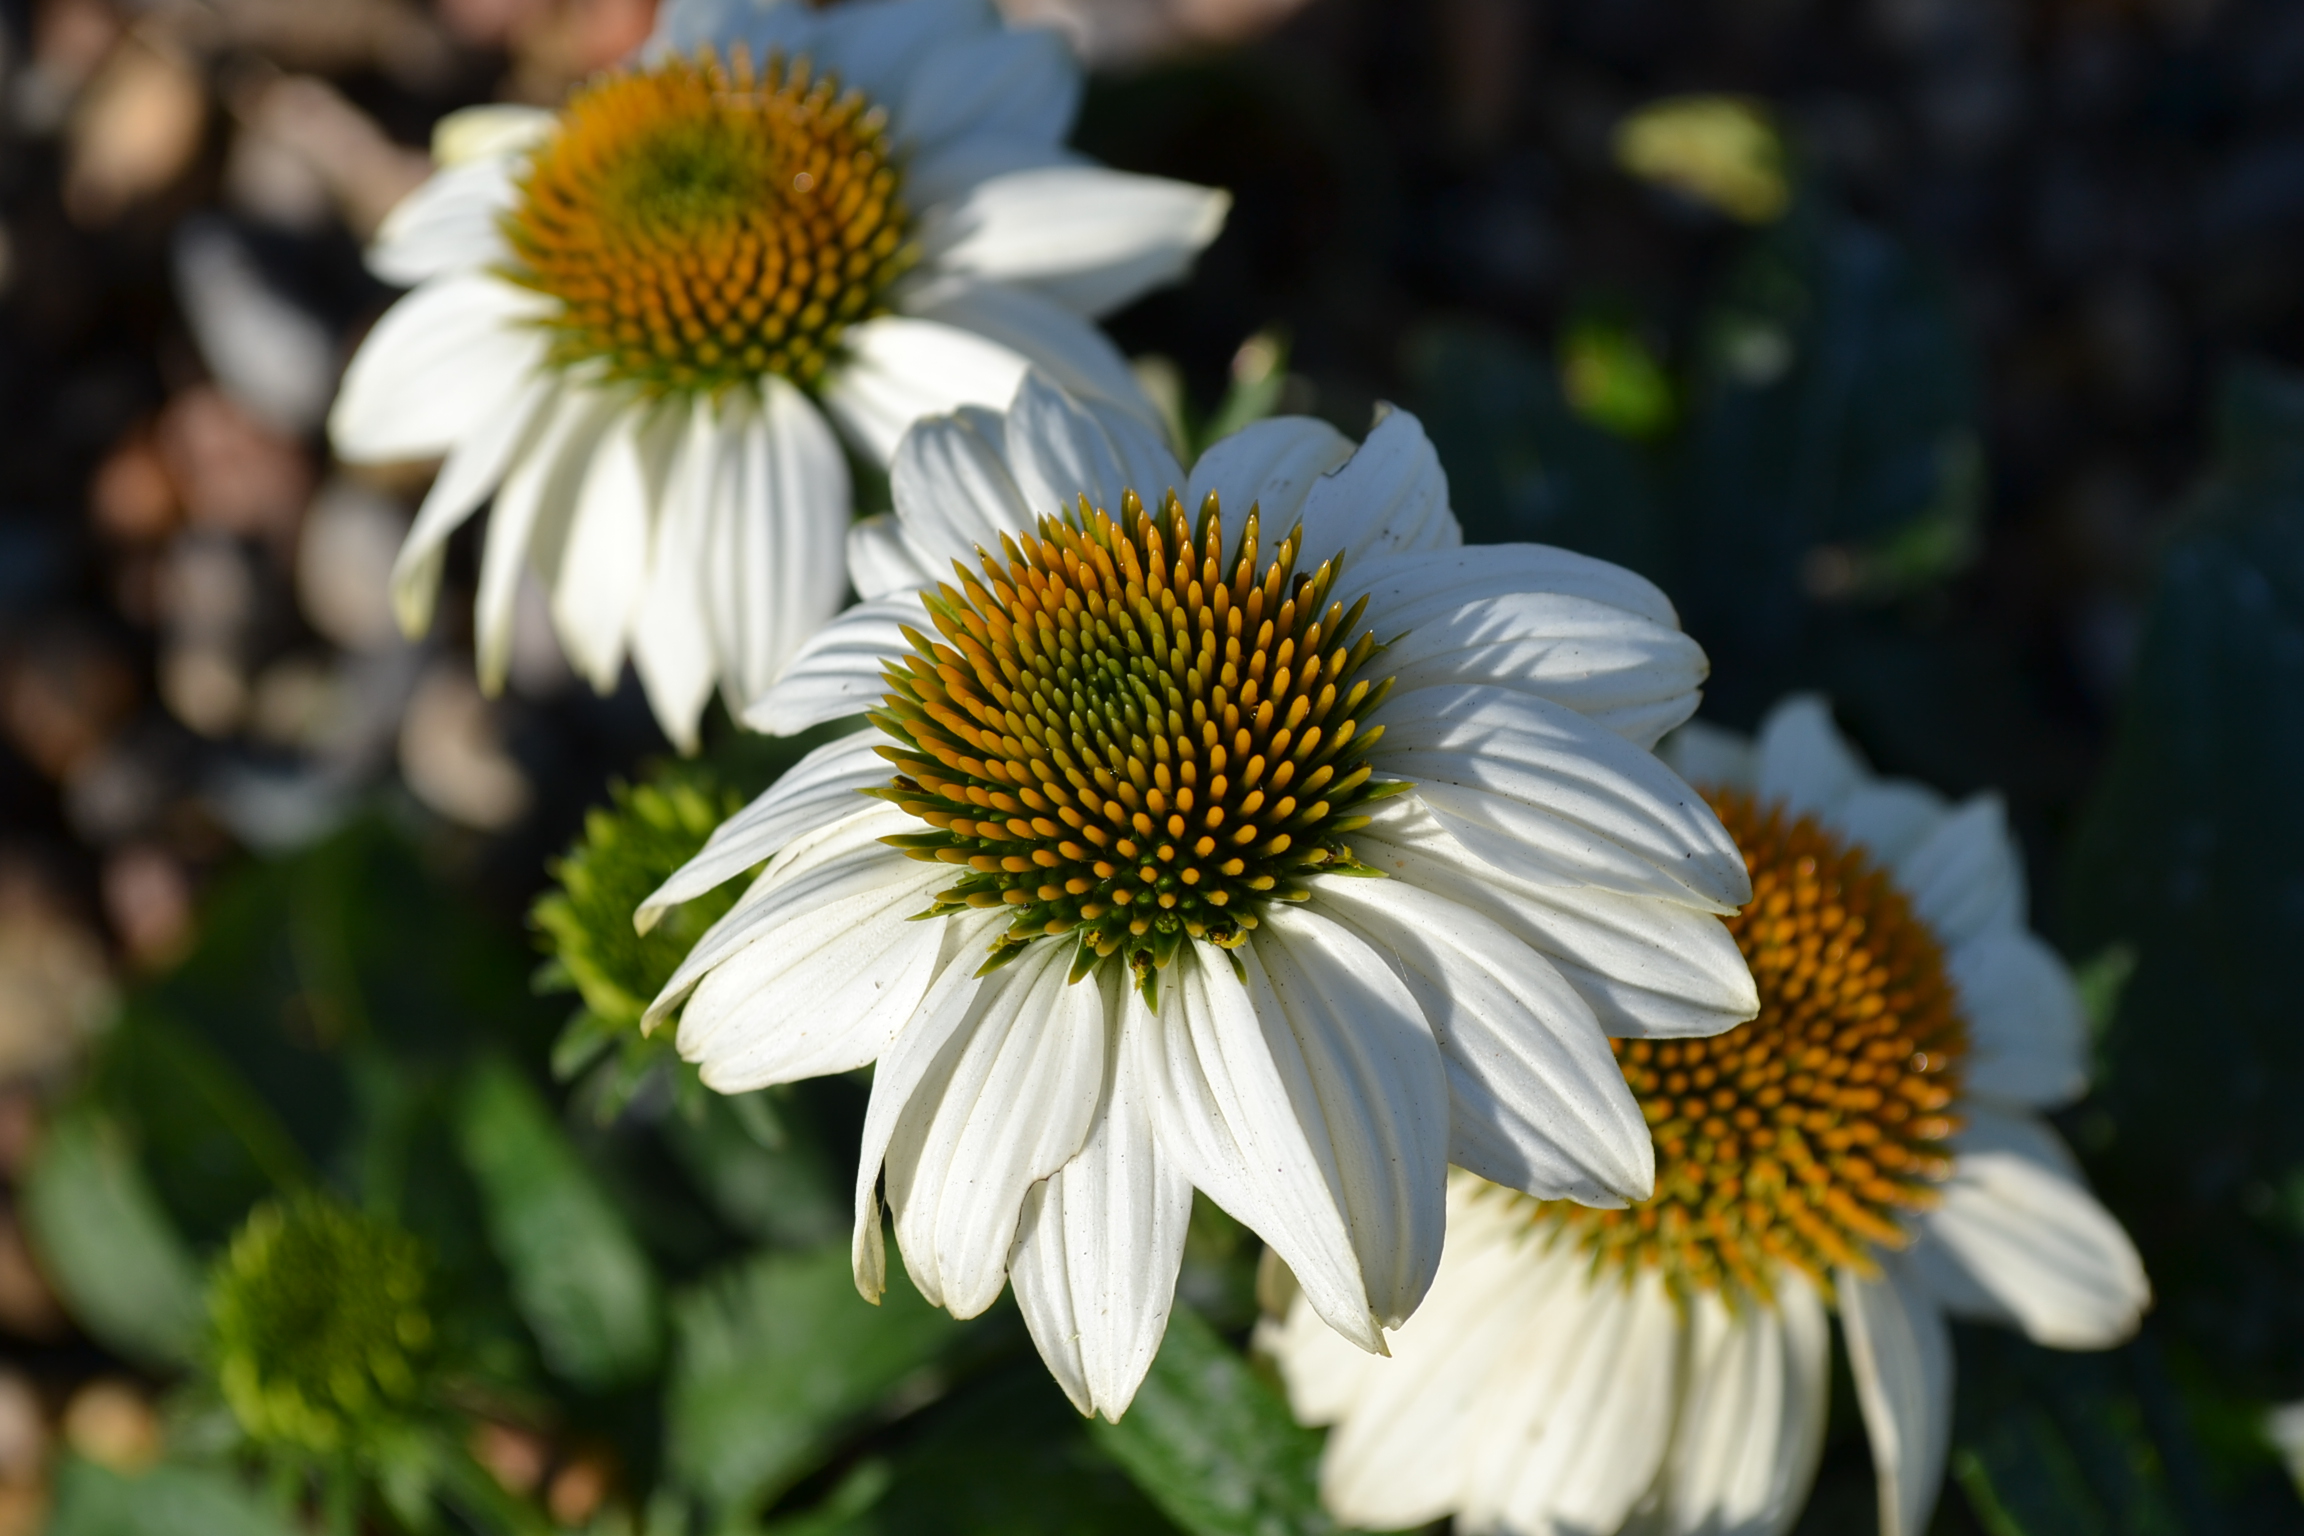 White Swan Coneflower Works Well in Butterfly Gardens and Landscapes.